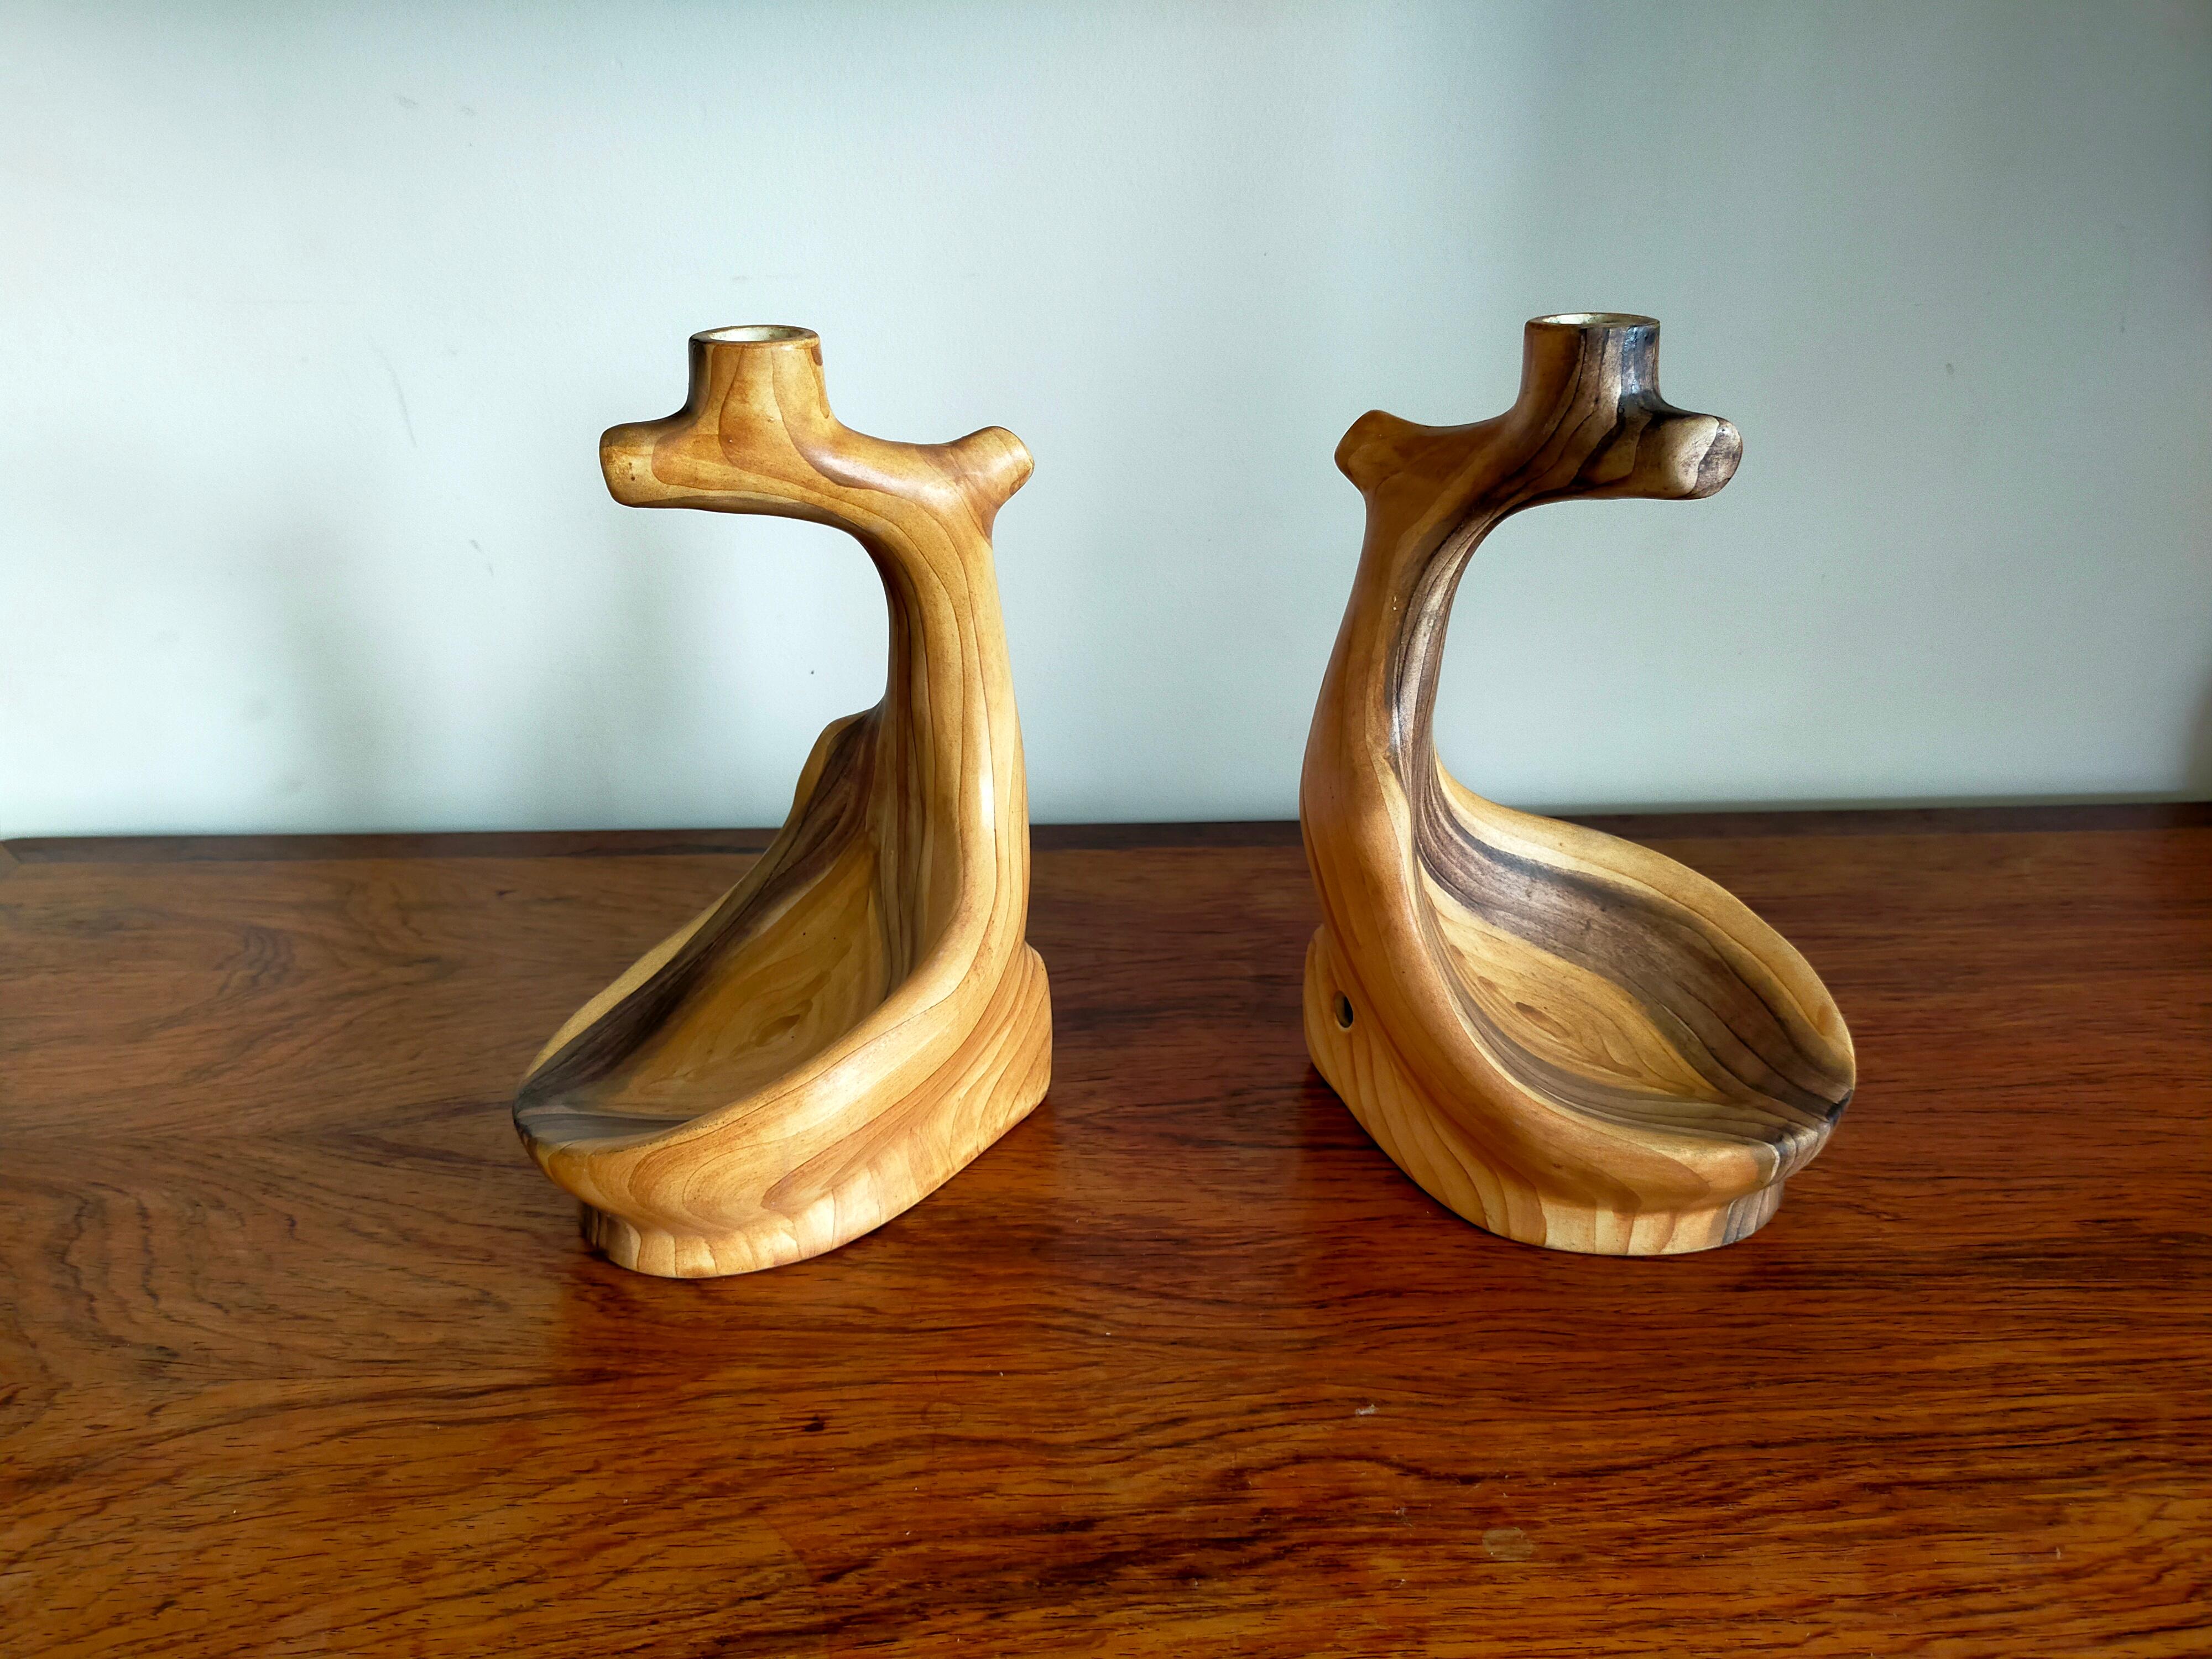 Pair of Candlesticks or lamp bases (that can be electrified) by Grandjean Jourdan in Vallauris.
Decorated in faux wood, enamel matte to satin, typical work of the 50s, 60s.